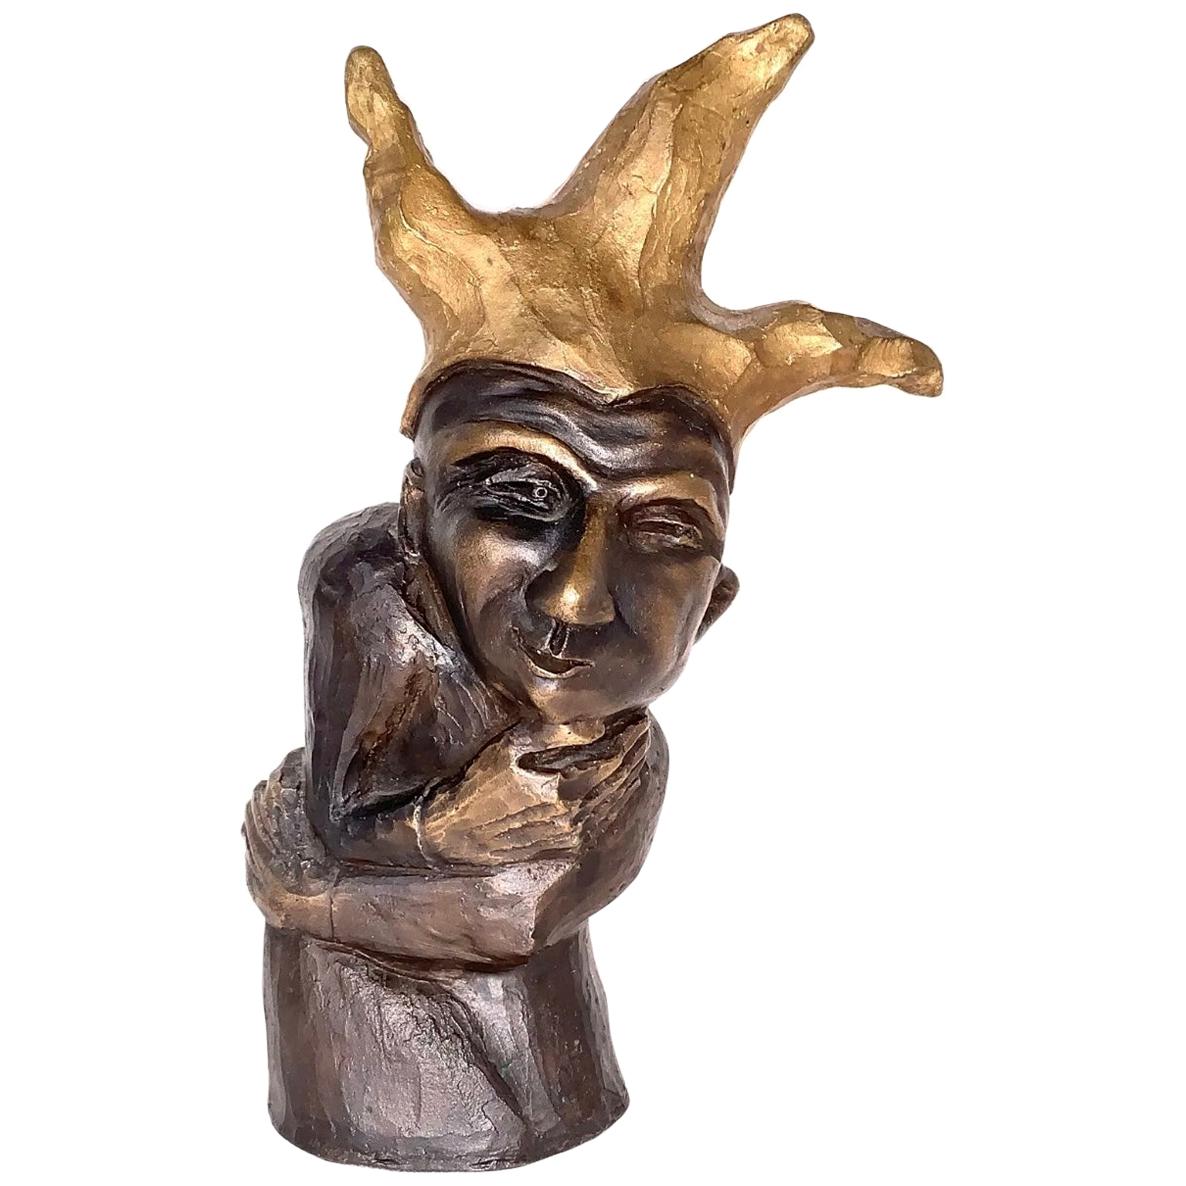 Abstract Bronze Sculpture by Claudia Katrin Leyh "Joker" limited Edition 1/13